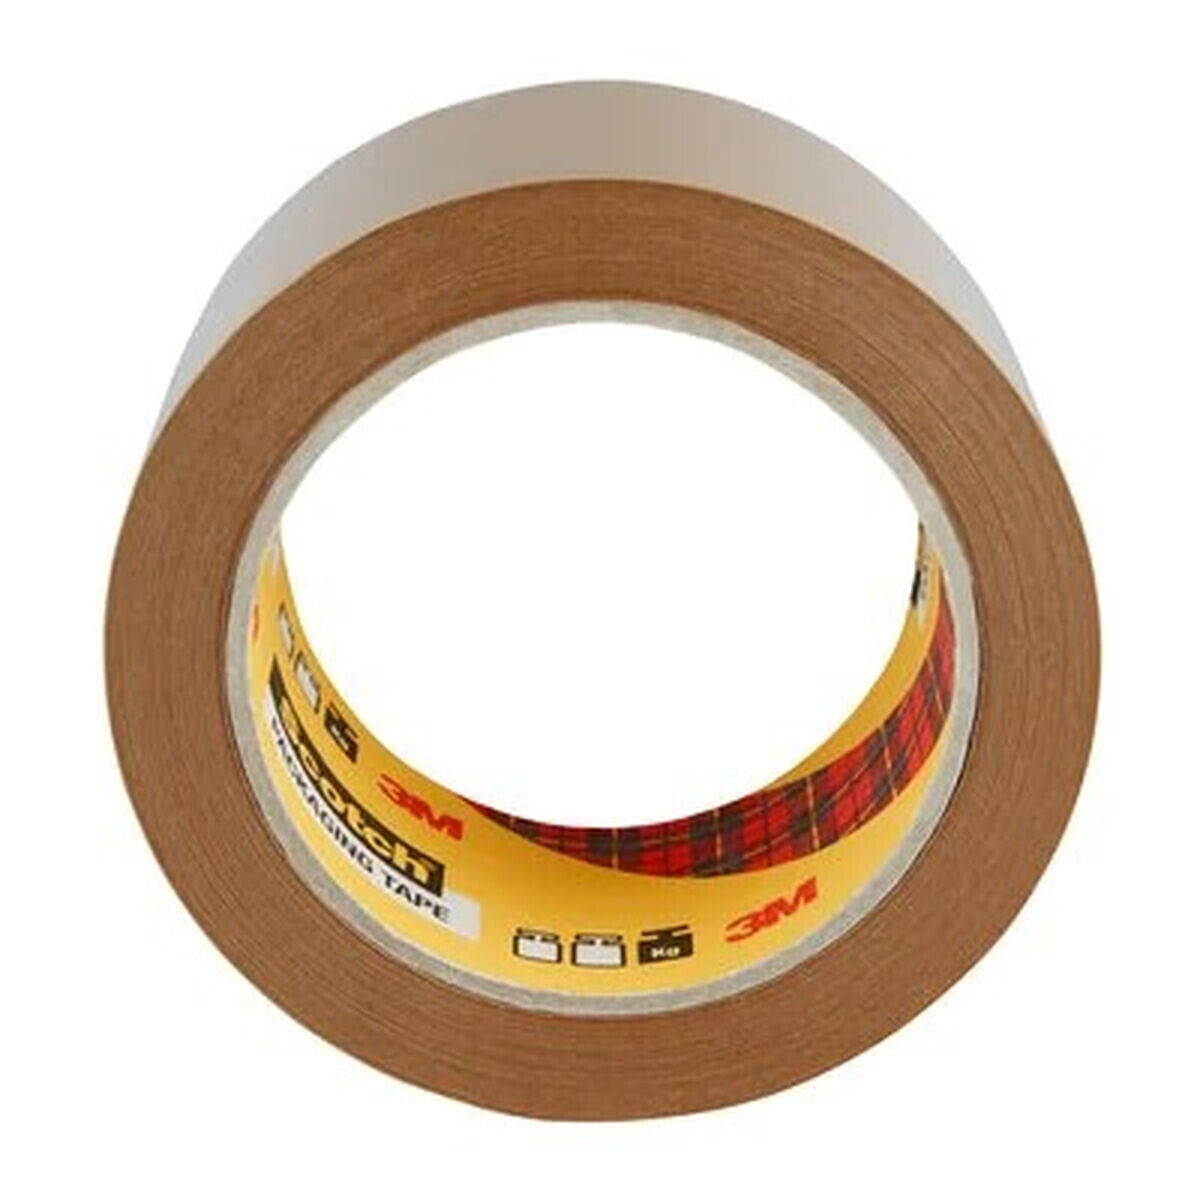 Adhesive Tape Scotch Packaging Brown 50 mm x 66 m (6 Pieces) (6 Units)